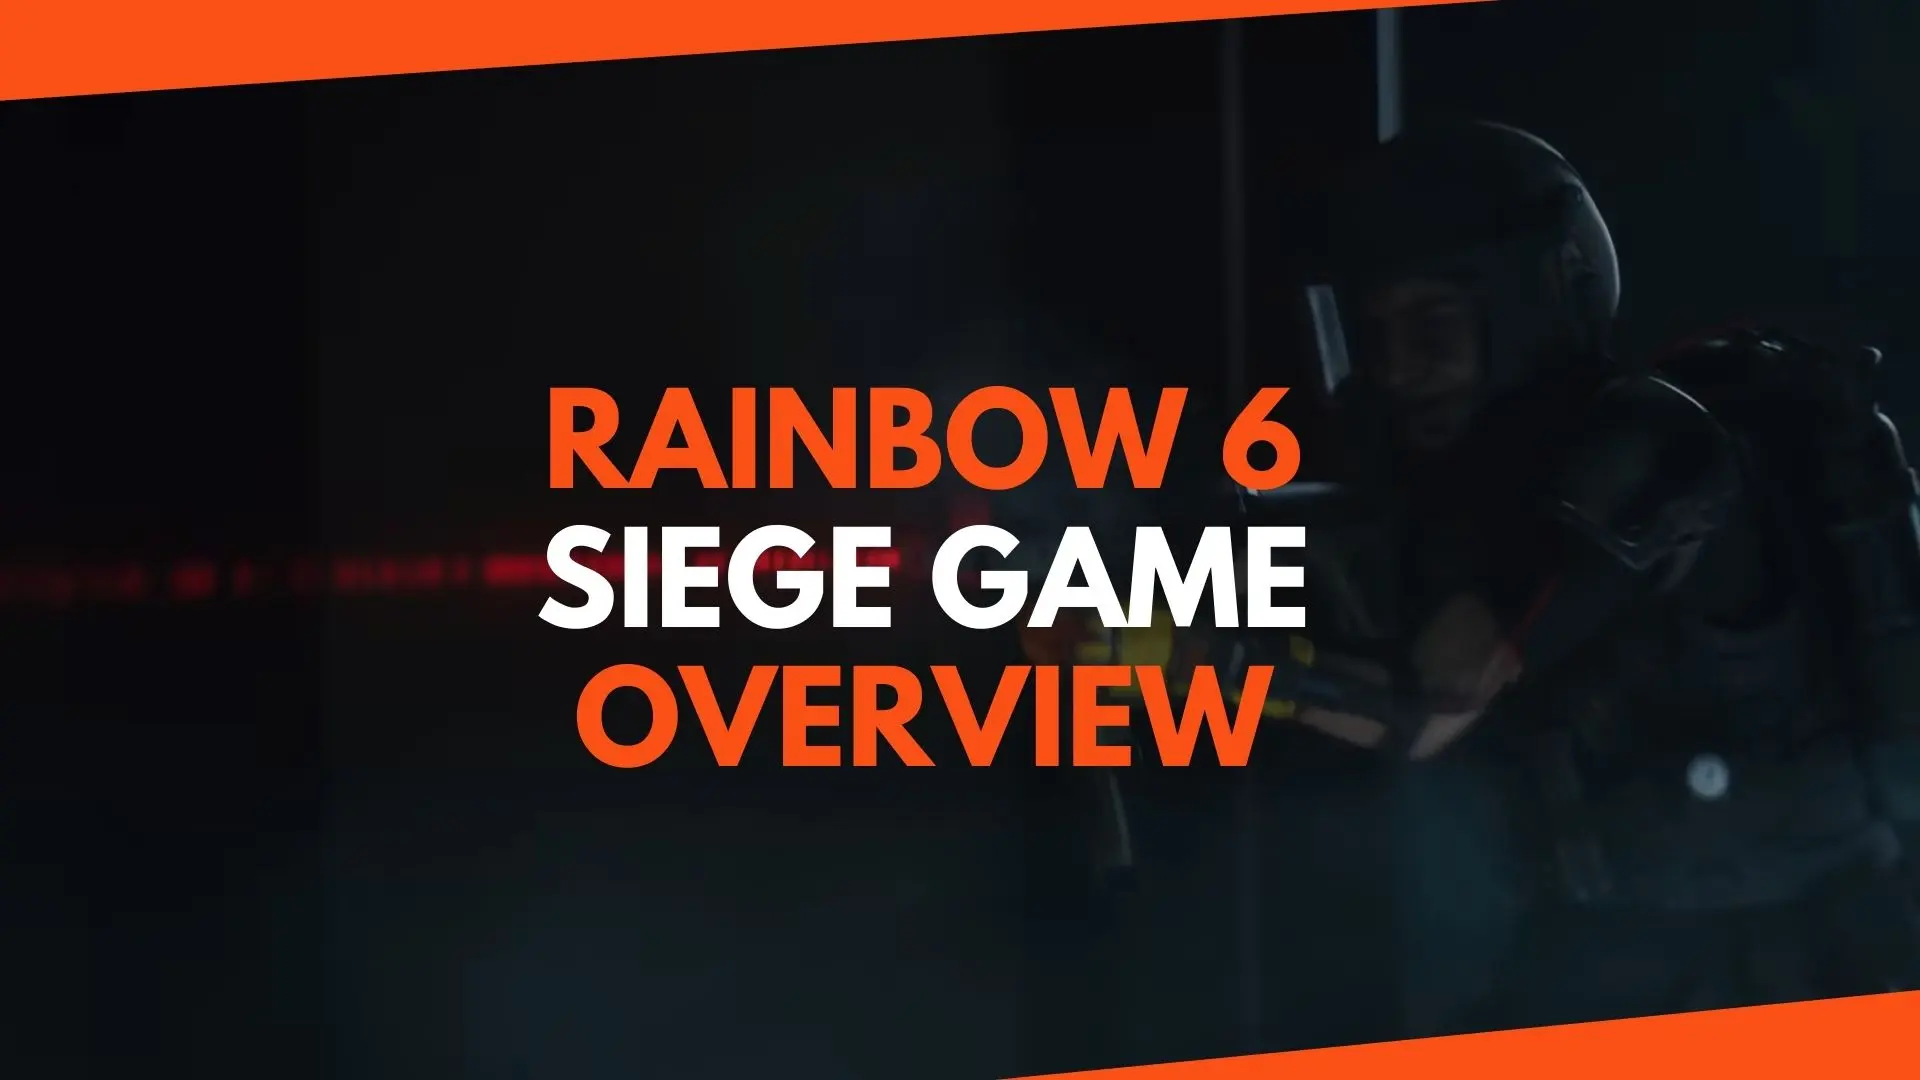 Rainbow 6 Siege Game Overview